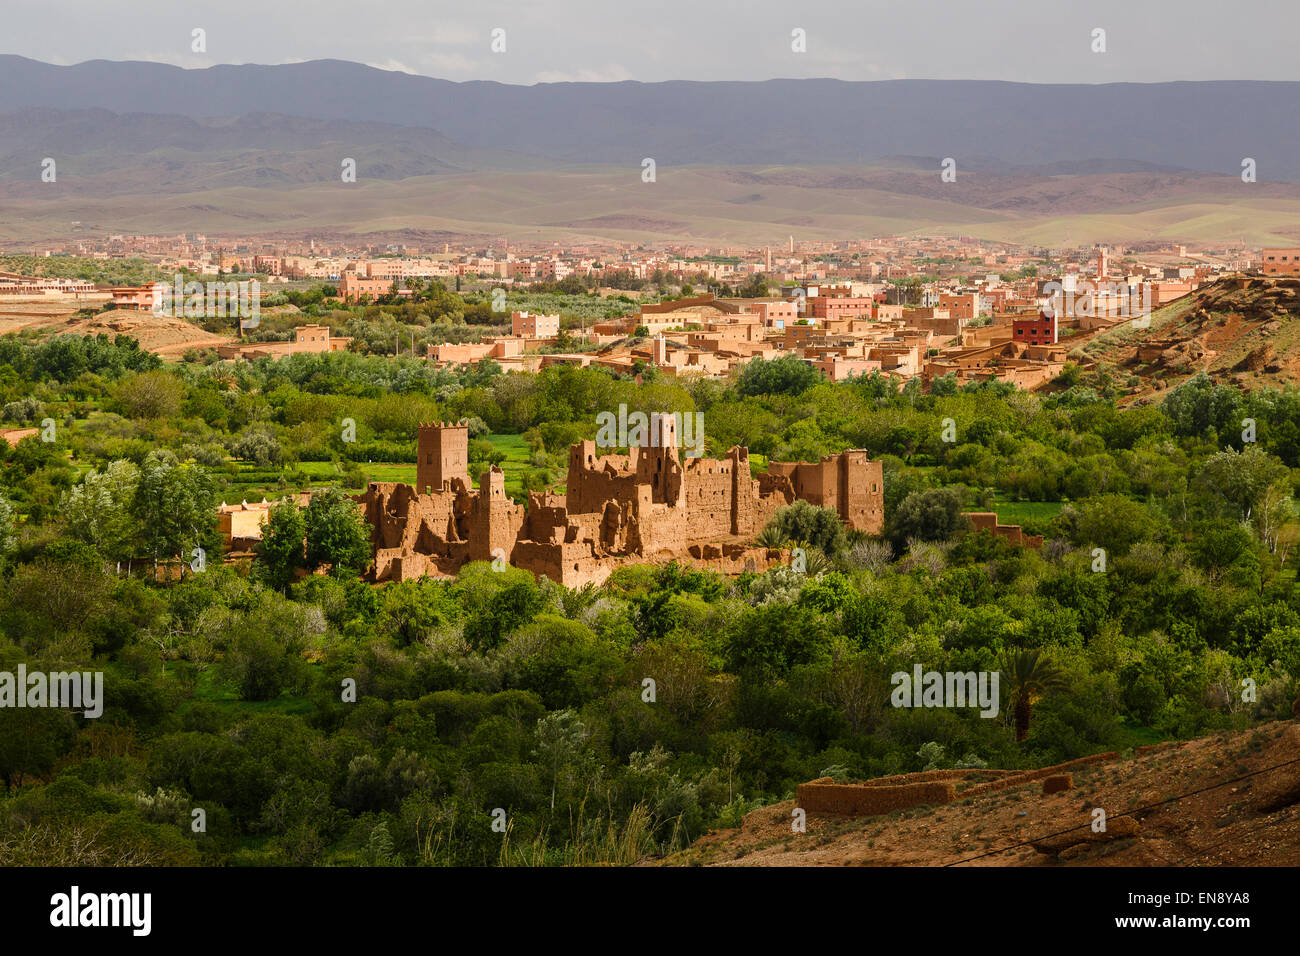 Ruins of a decaying Kasbah, mud fortress, residential Berber castle, Tighremt, Kelaa M'Gouna, Rose Valley, southern Morocco, Mor Stock Photo